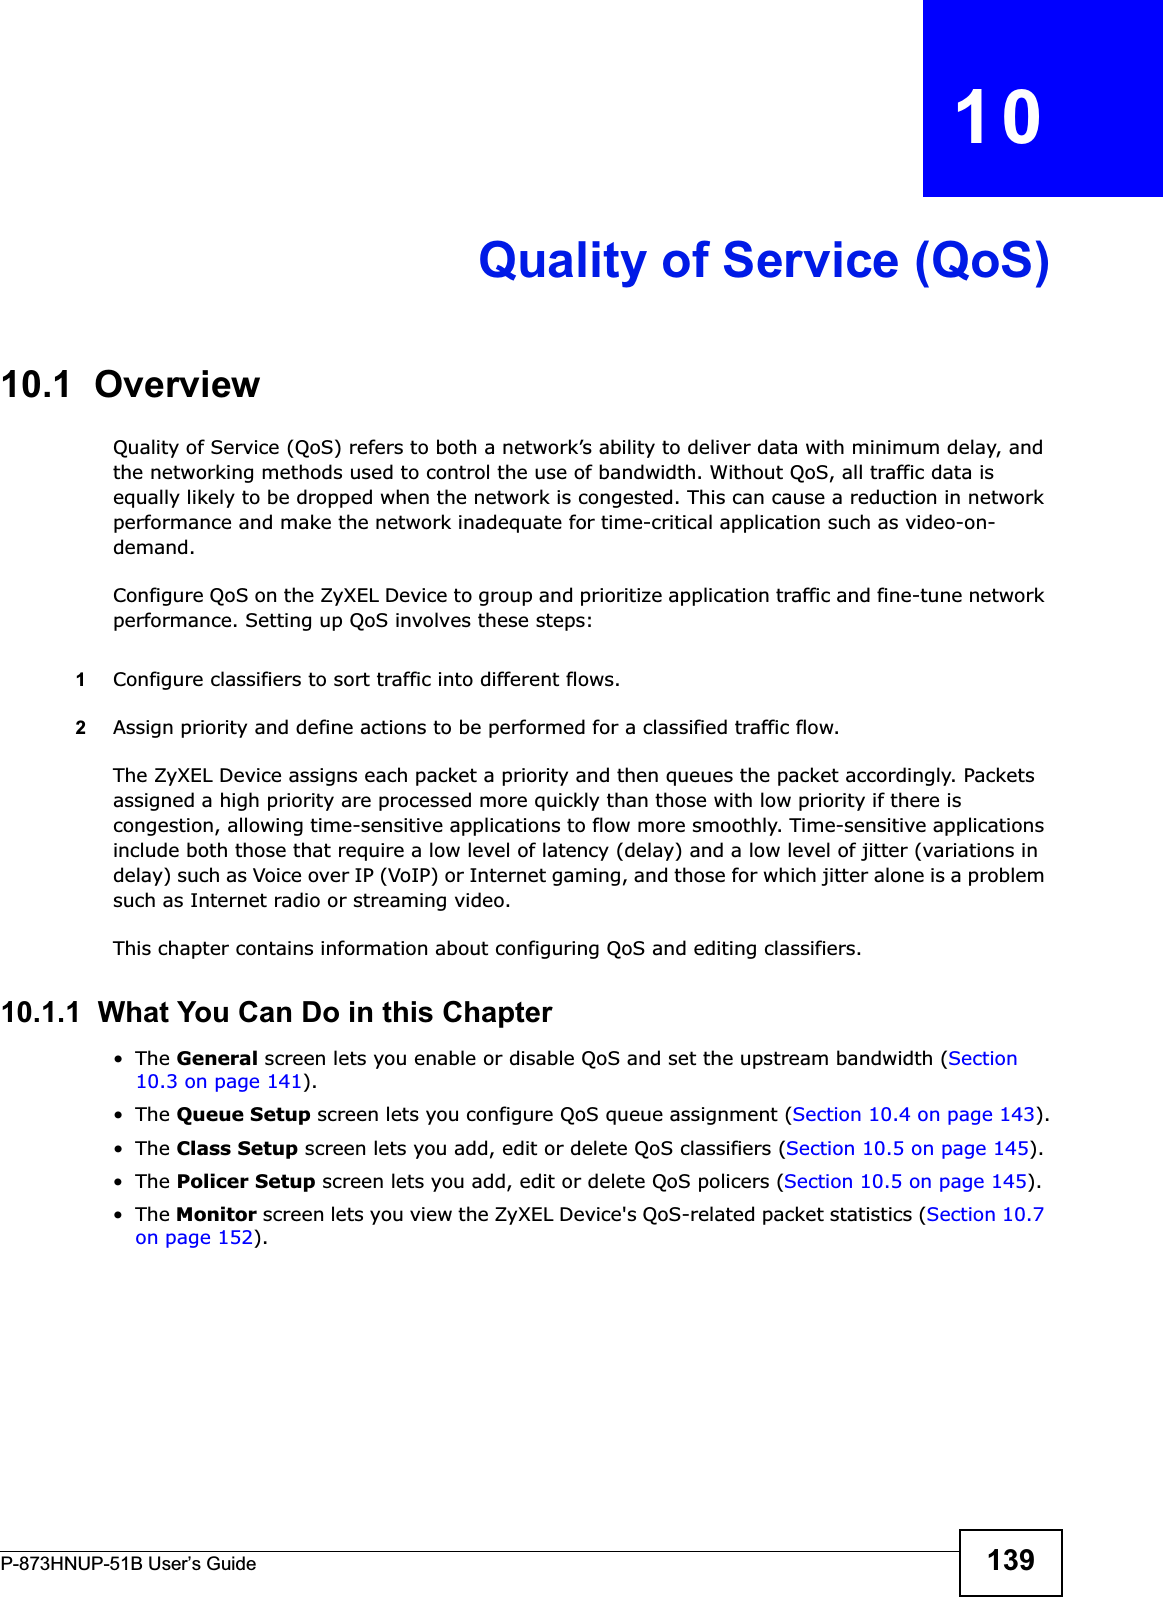 P-873HNUP-51B User’s Guide 139CHAPTER   10Quality of Service (QoS)10.1  Overview Quality of Service (QoS) refers to both a network’s ability to deliver data with minimum delay, and the networking methods used to control the use of bandwidth. Without QoS, all traffic data is equally likely to be dropped when the network is congested. This can cause a reduction in network performance and make the network inadequate for time-critical application such as video-on-demand.Configure QoS on the ZyXEL Device to group and prioritize application traffic and fine-tune network performance. Setting up QoS involves these steps:1Configure classifiers to sort traffic into different flows. 2Assign priority and define actions to be performed for a classified traffic flow. The ZyXEL Device assigns each packet a priority and then queues the packet accordingly. Packets assigned a high priority are processed more quickly than those with low priority if there is congestion, allowing time-sensitive applications to flow more smoothly. Time-sensitive applications include both those that require a low level of latency (delay) and a low level of jitter (variations in delay) such as Voice over IP (VoIP) or Internet gaming, and those for which jitter alone is a problem such as Internet radio or streaming video.This chapter contains information about configuring QoS and editing classifiers.10.1.1  What You Can Do in this Chapter•The General screen lets you enable or disable QoS and set the upstream bandwidth (Section 10.3 on page 141).•The Queue Setup screen lets you configure QoS queue assignment (Section 10.4 on page 143).•The Class Setup screen lets you add, edit or delete QoS classifiers (Section 10.5 on page 145).•The Policer Setup screen lets you add, edit or delete QoS policers (Section 10.5 on page 145).•The Monitor screen lets you view the ZyXEL Device&apos;s QoS-related packet statistics (Section 10.7 on page 152).